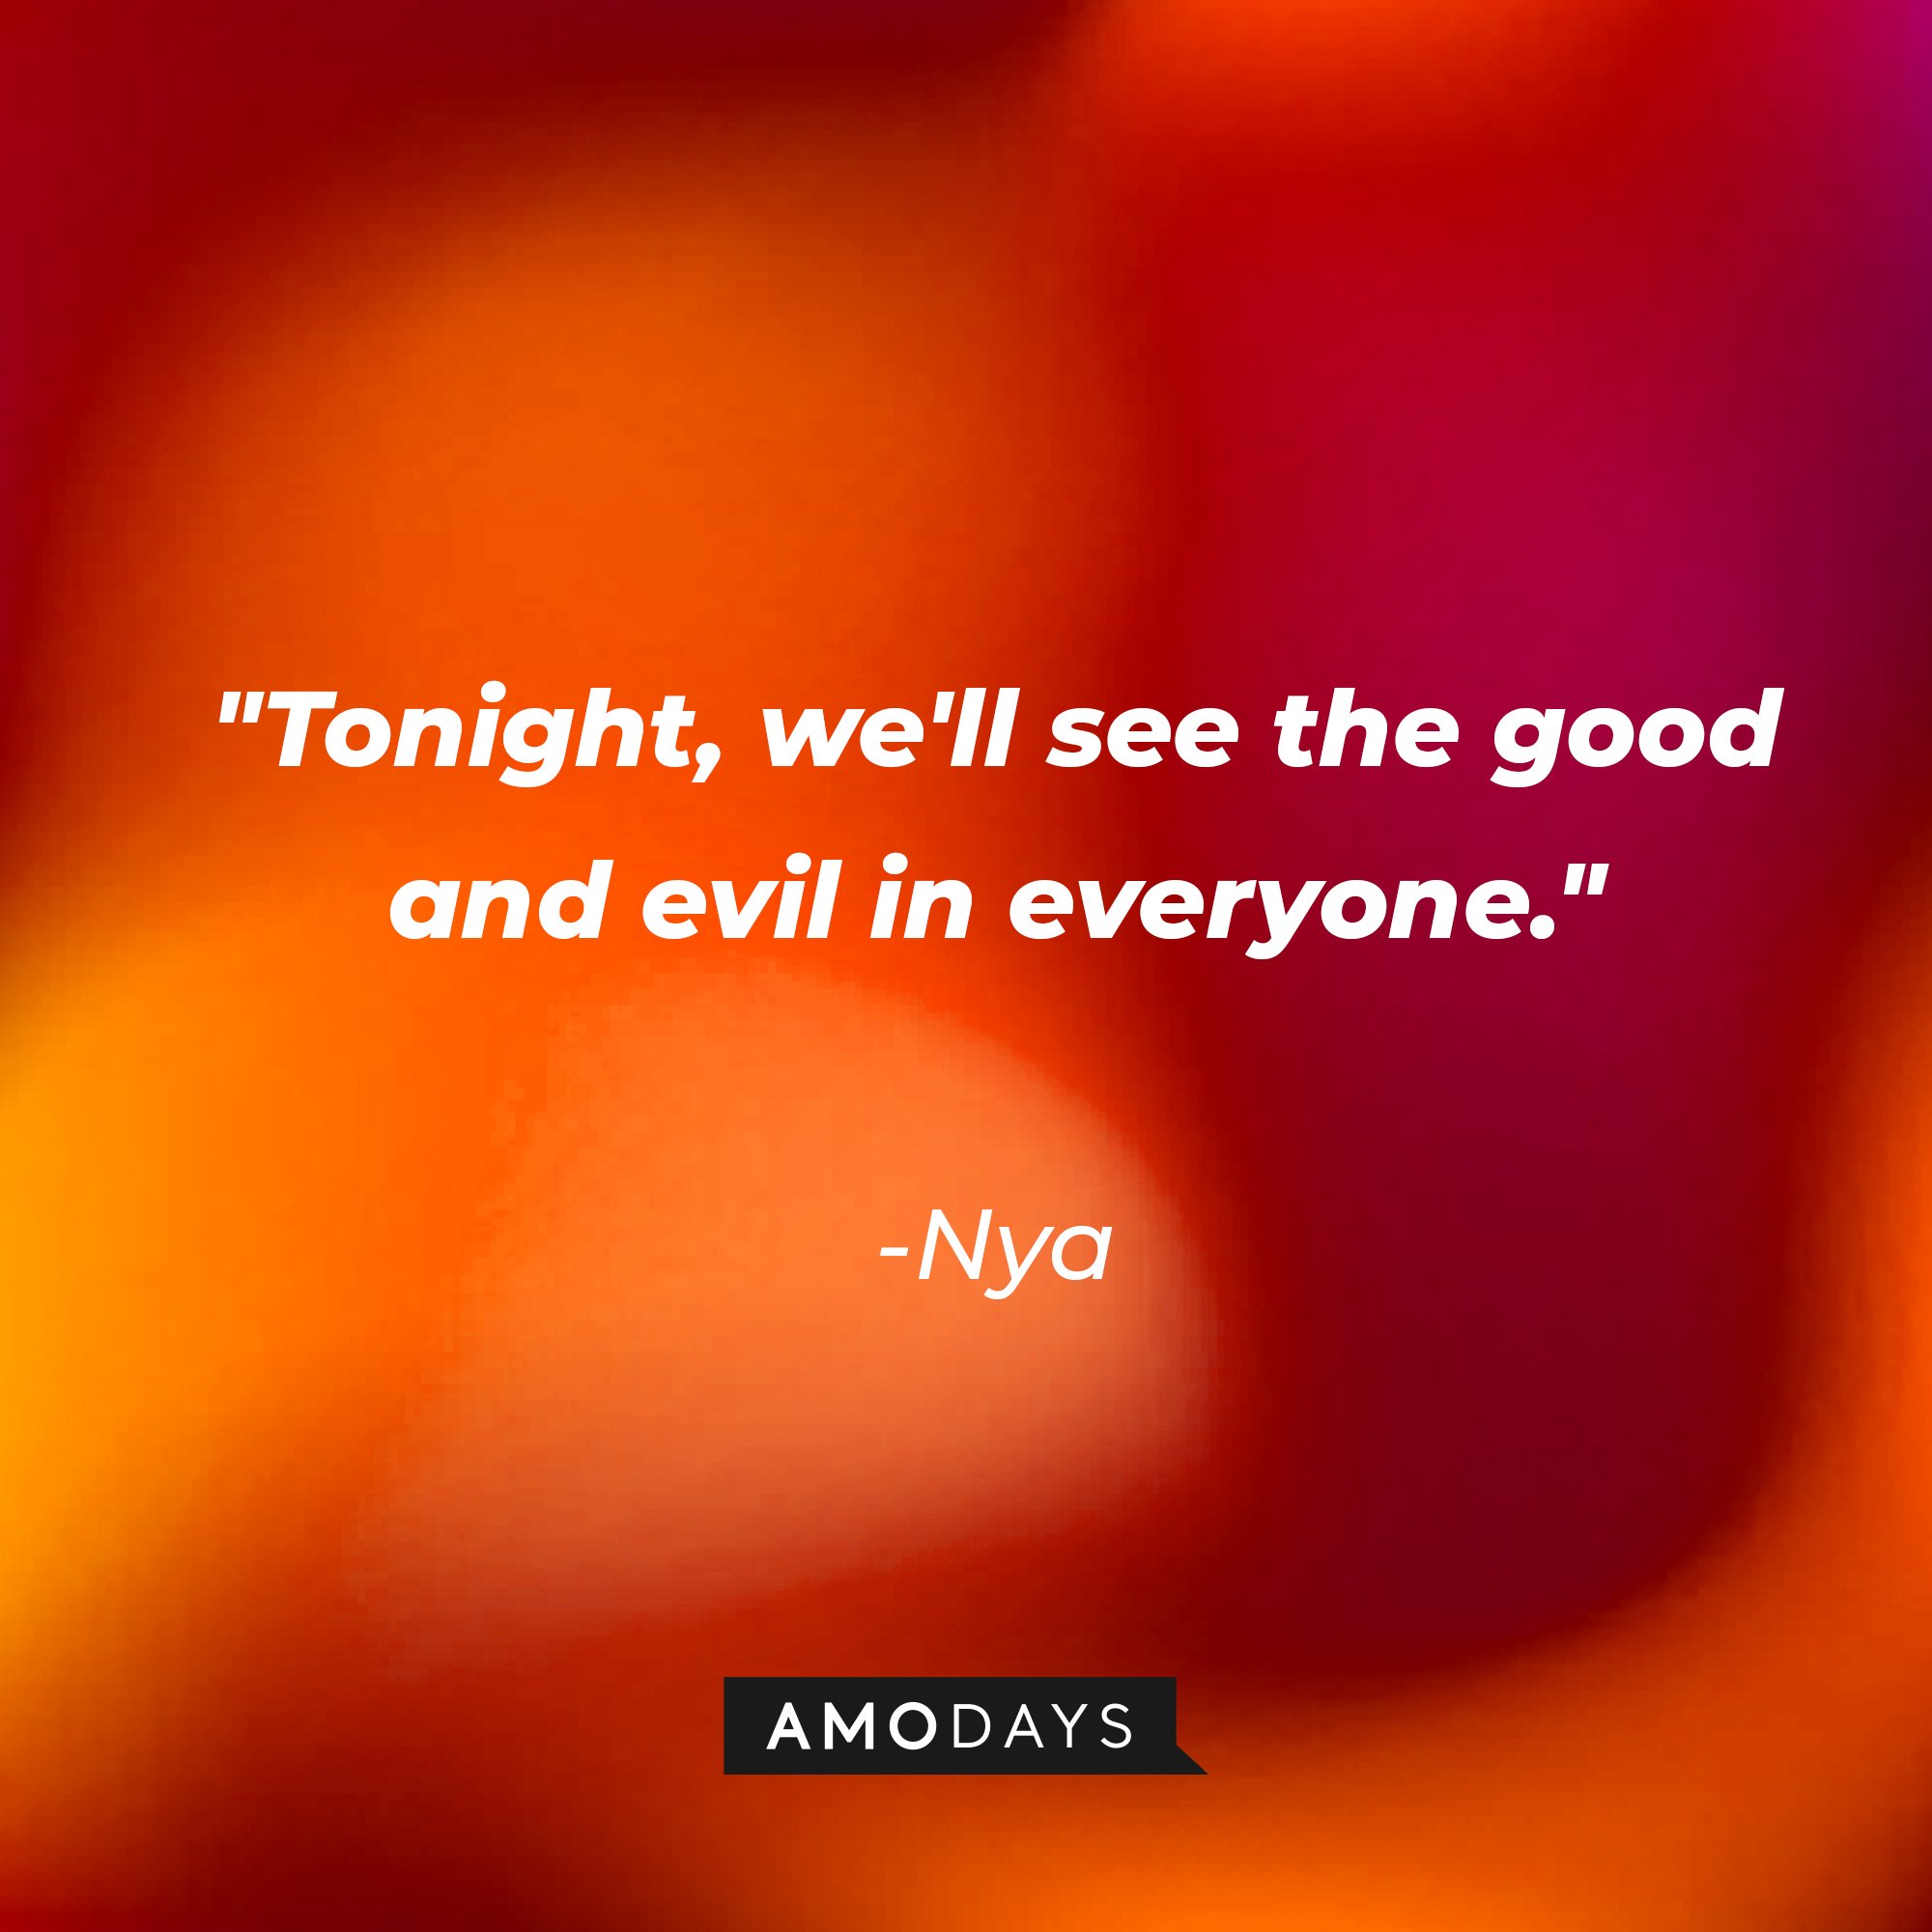 Nya’s quote: "Tonight, we'll see the good and evil in everyone." | Image: AmoDays  